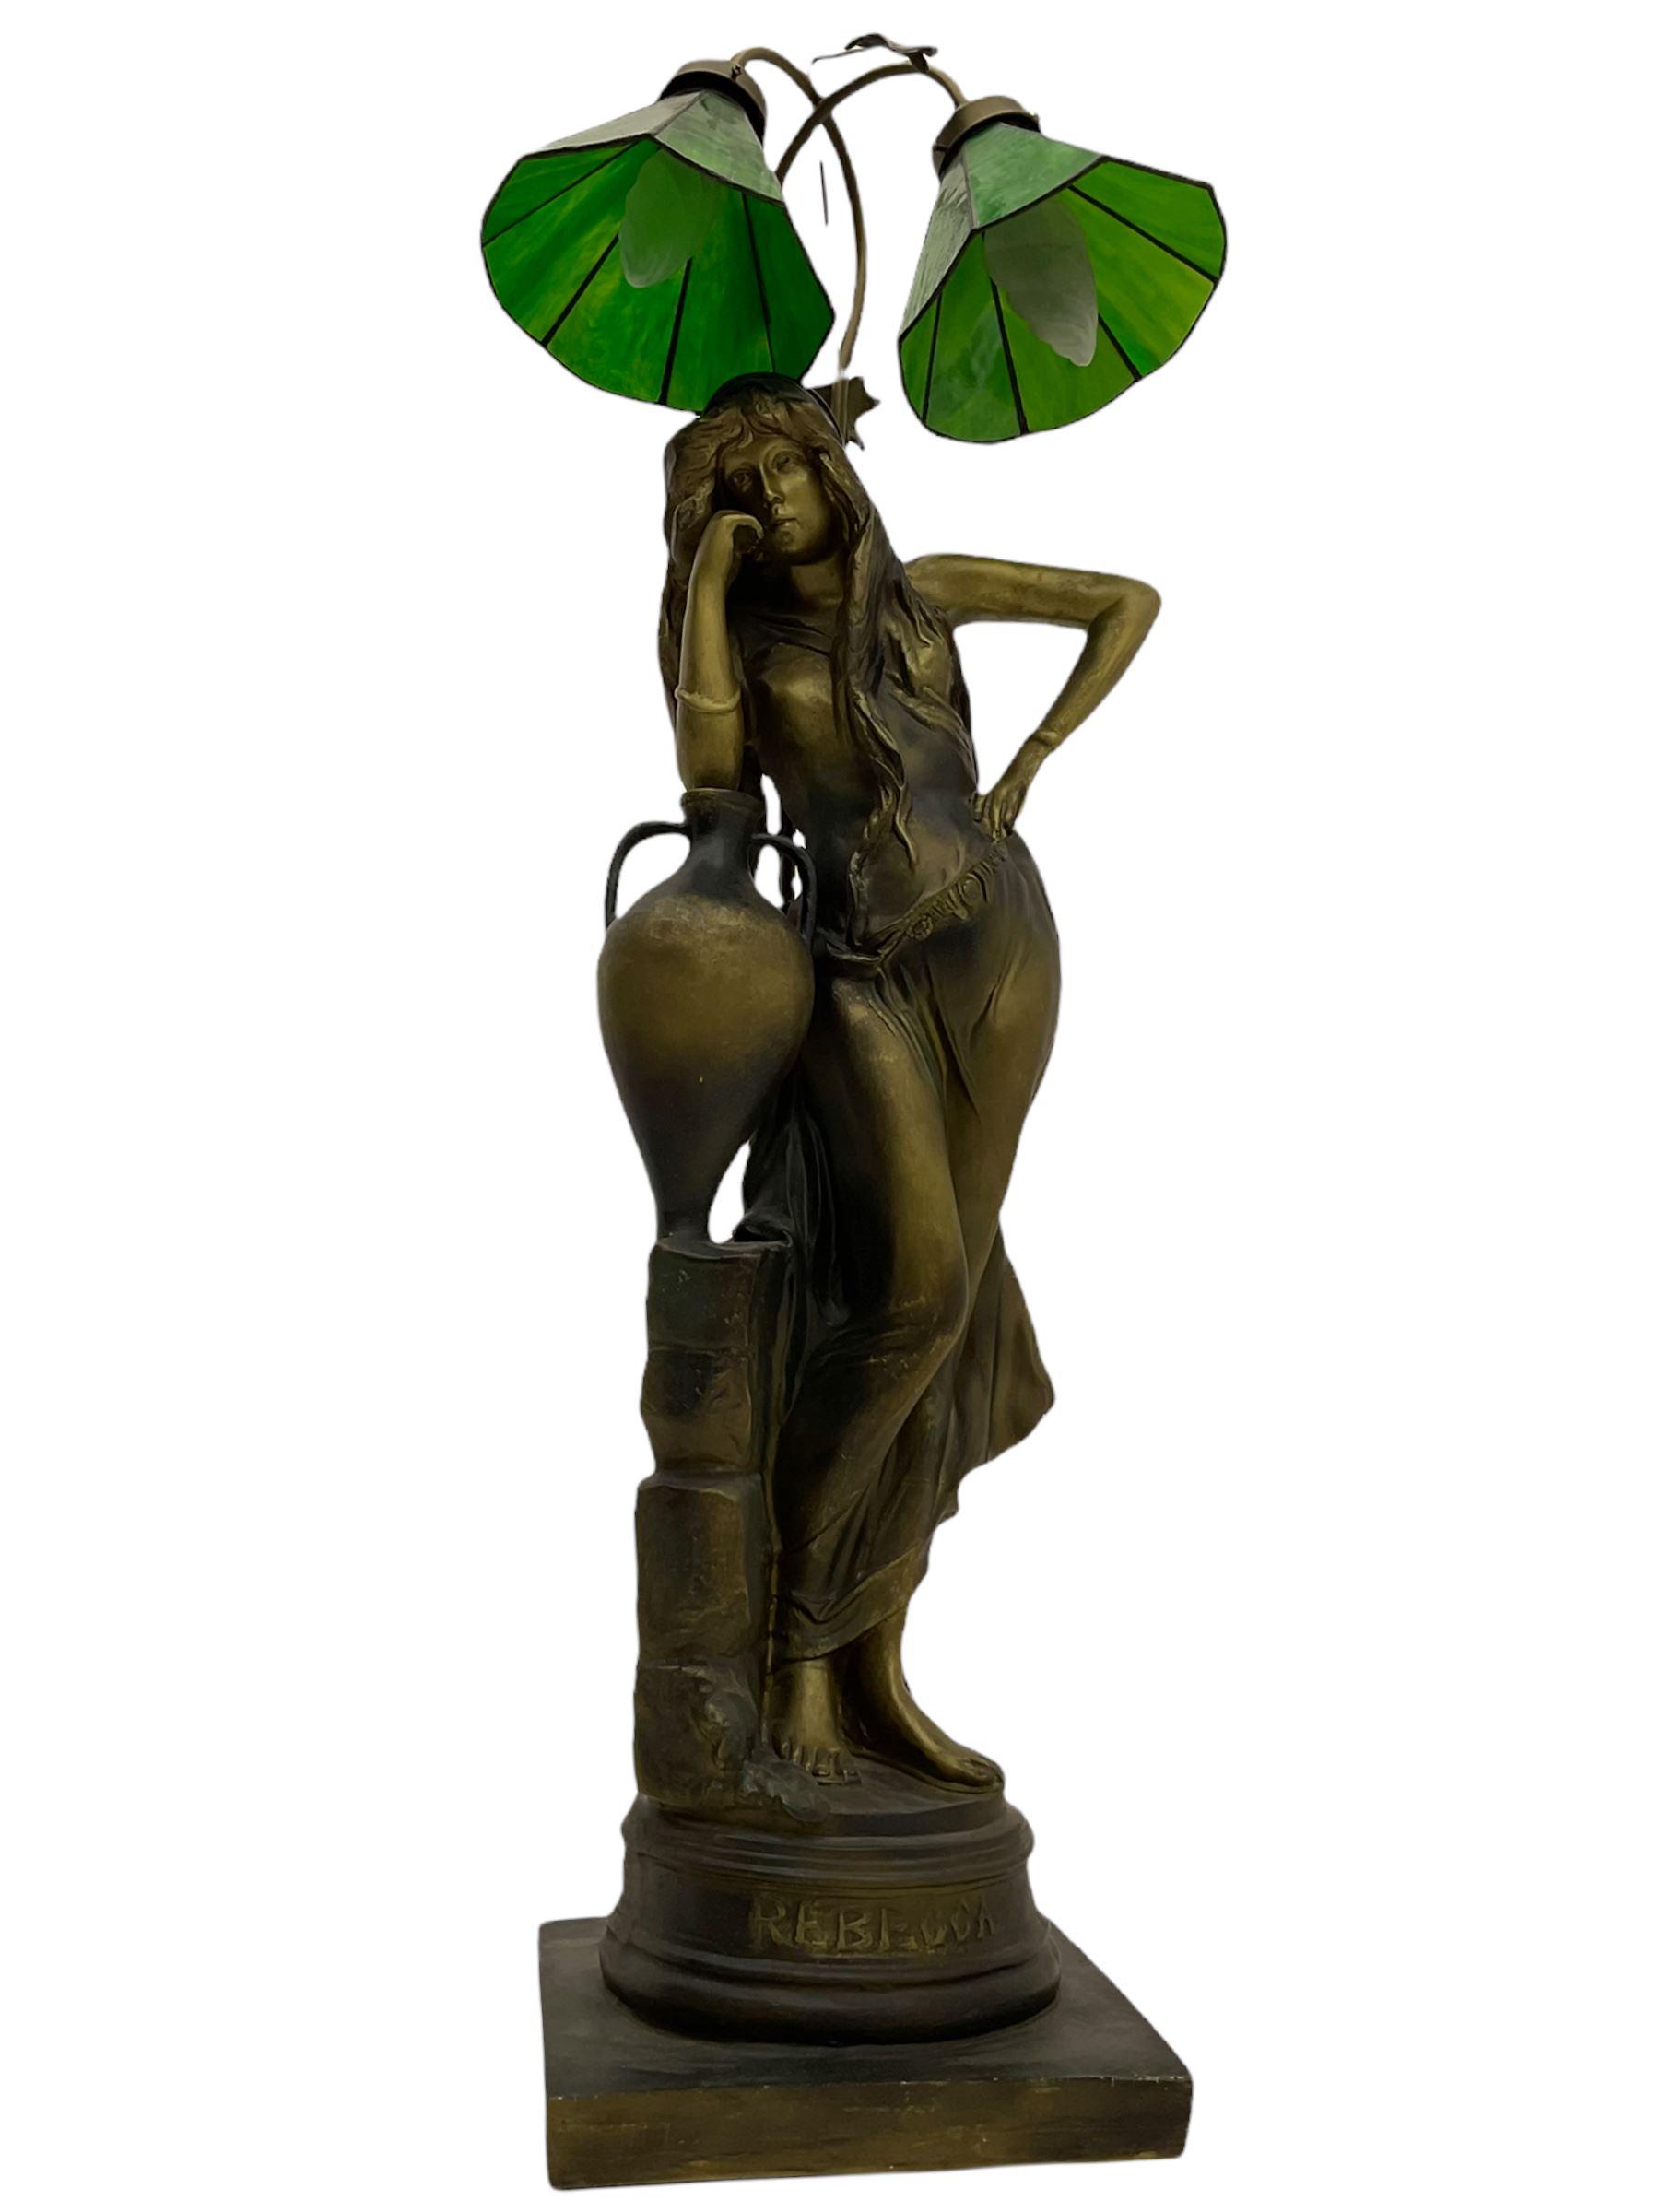 Large Italian style figural lamp depicting Rebecca with urn - Image 4 of 7